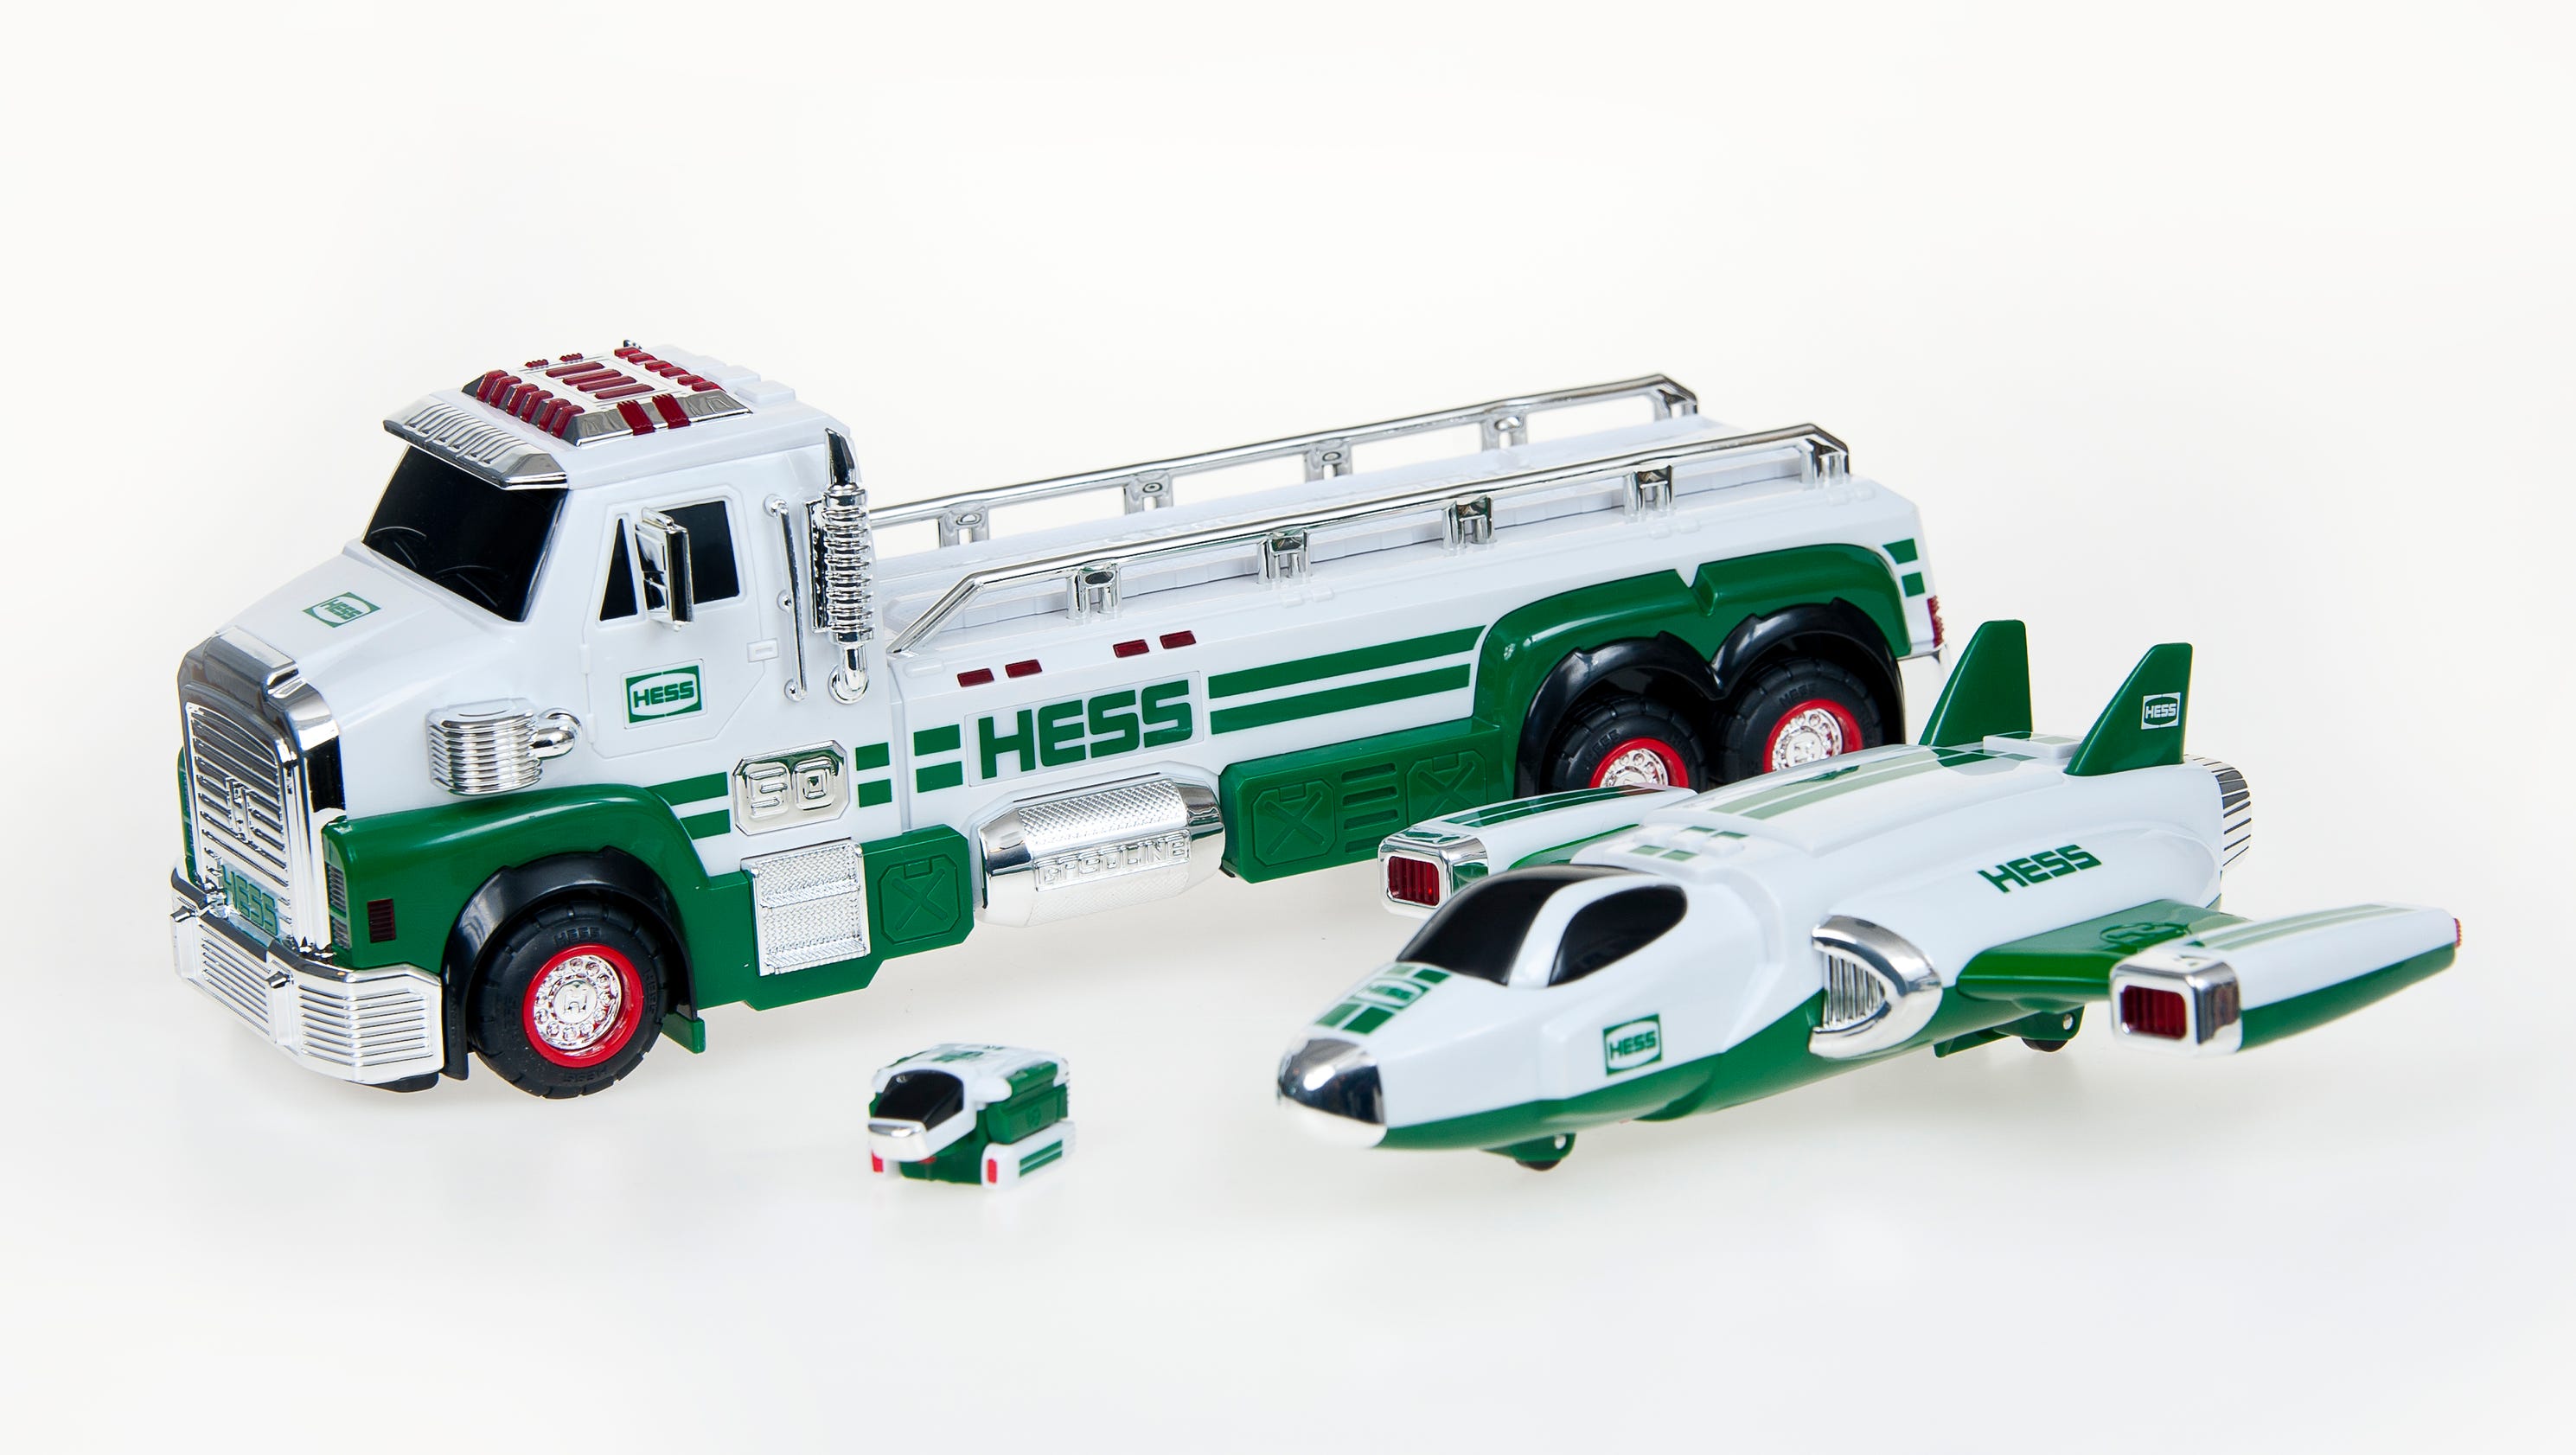 50th anniversary Hess truck released